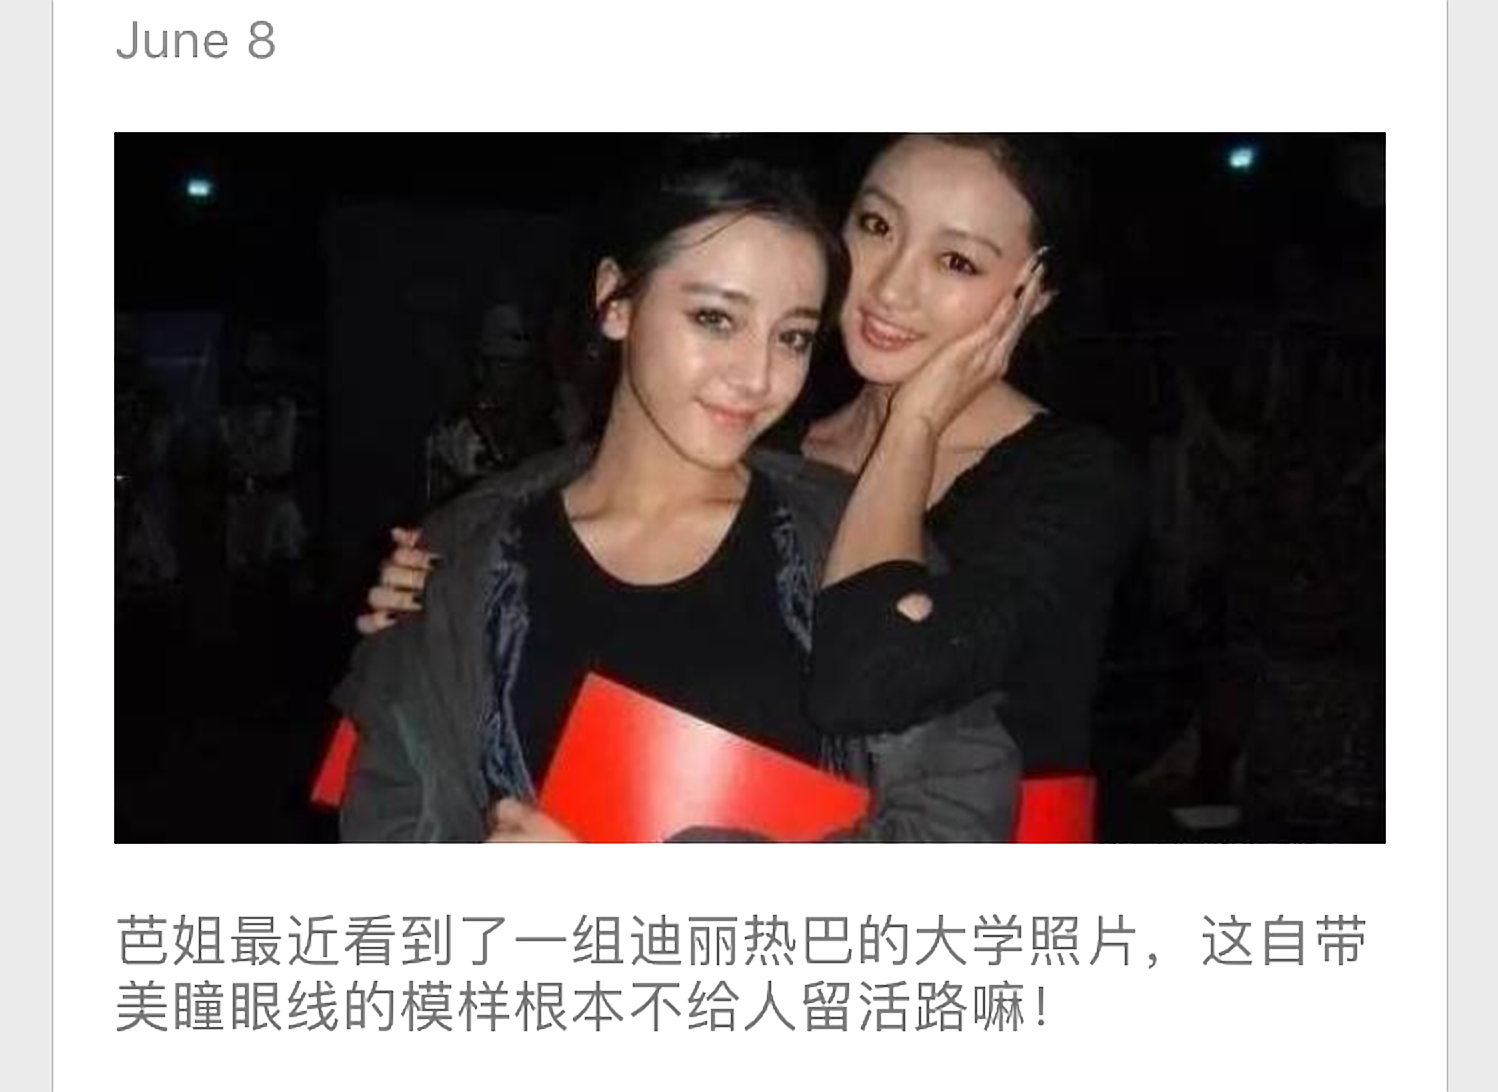 Image of reality television star Dilireba that appeared on Harper's Bazaar's new WeChat account with the caption: "Harper's Bazaar recently found photos of Dilireba from her college years." Screenshot image of Harper's Bazaar's new WeChat account via Jing Daily.